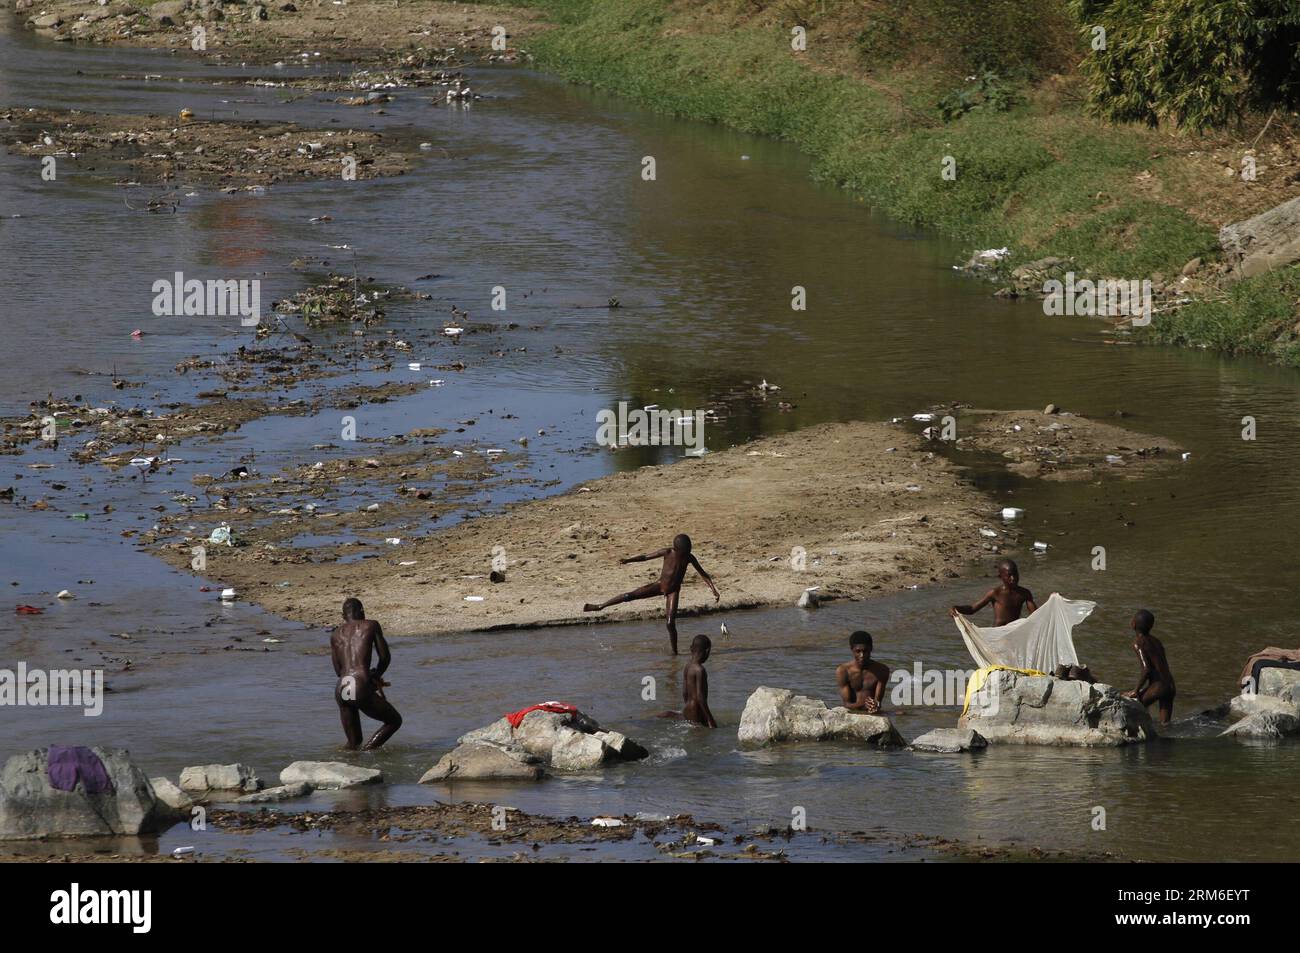 (140108) -- OUANAMINTHE,  (Xinhua) -- Haitians take bath in the Masacre or Dajabon river on the border of Haiti and Dominican Republic in the city of Ouanaminthe, 317 km northeast from Port-au-Prince, Haiti s capital, on Jan. 7, 2014. Haiti and Dominican Republic on Tuesday resumed issues related to migration, trade, border security and regulation of binational markets, confirmed by both countries. Haiti recognized the sovereign right of Dominican Republic to determine its immigration policy and naturalization requirements, although requested guarantees to protect the basic rights of Haitian d Stock Photo